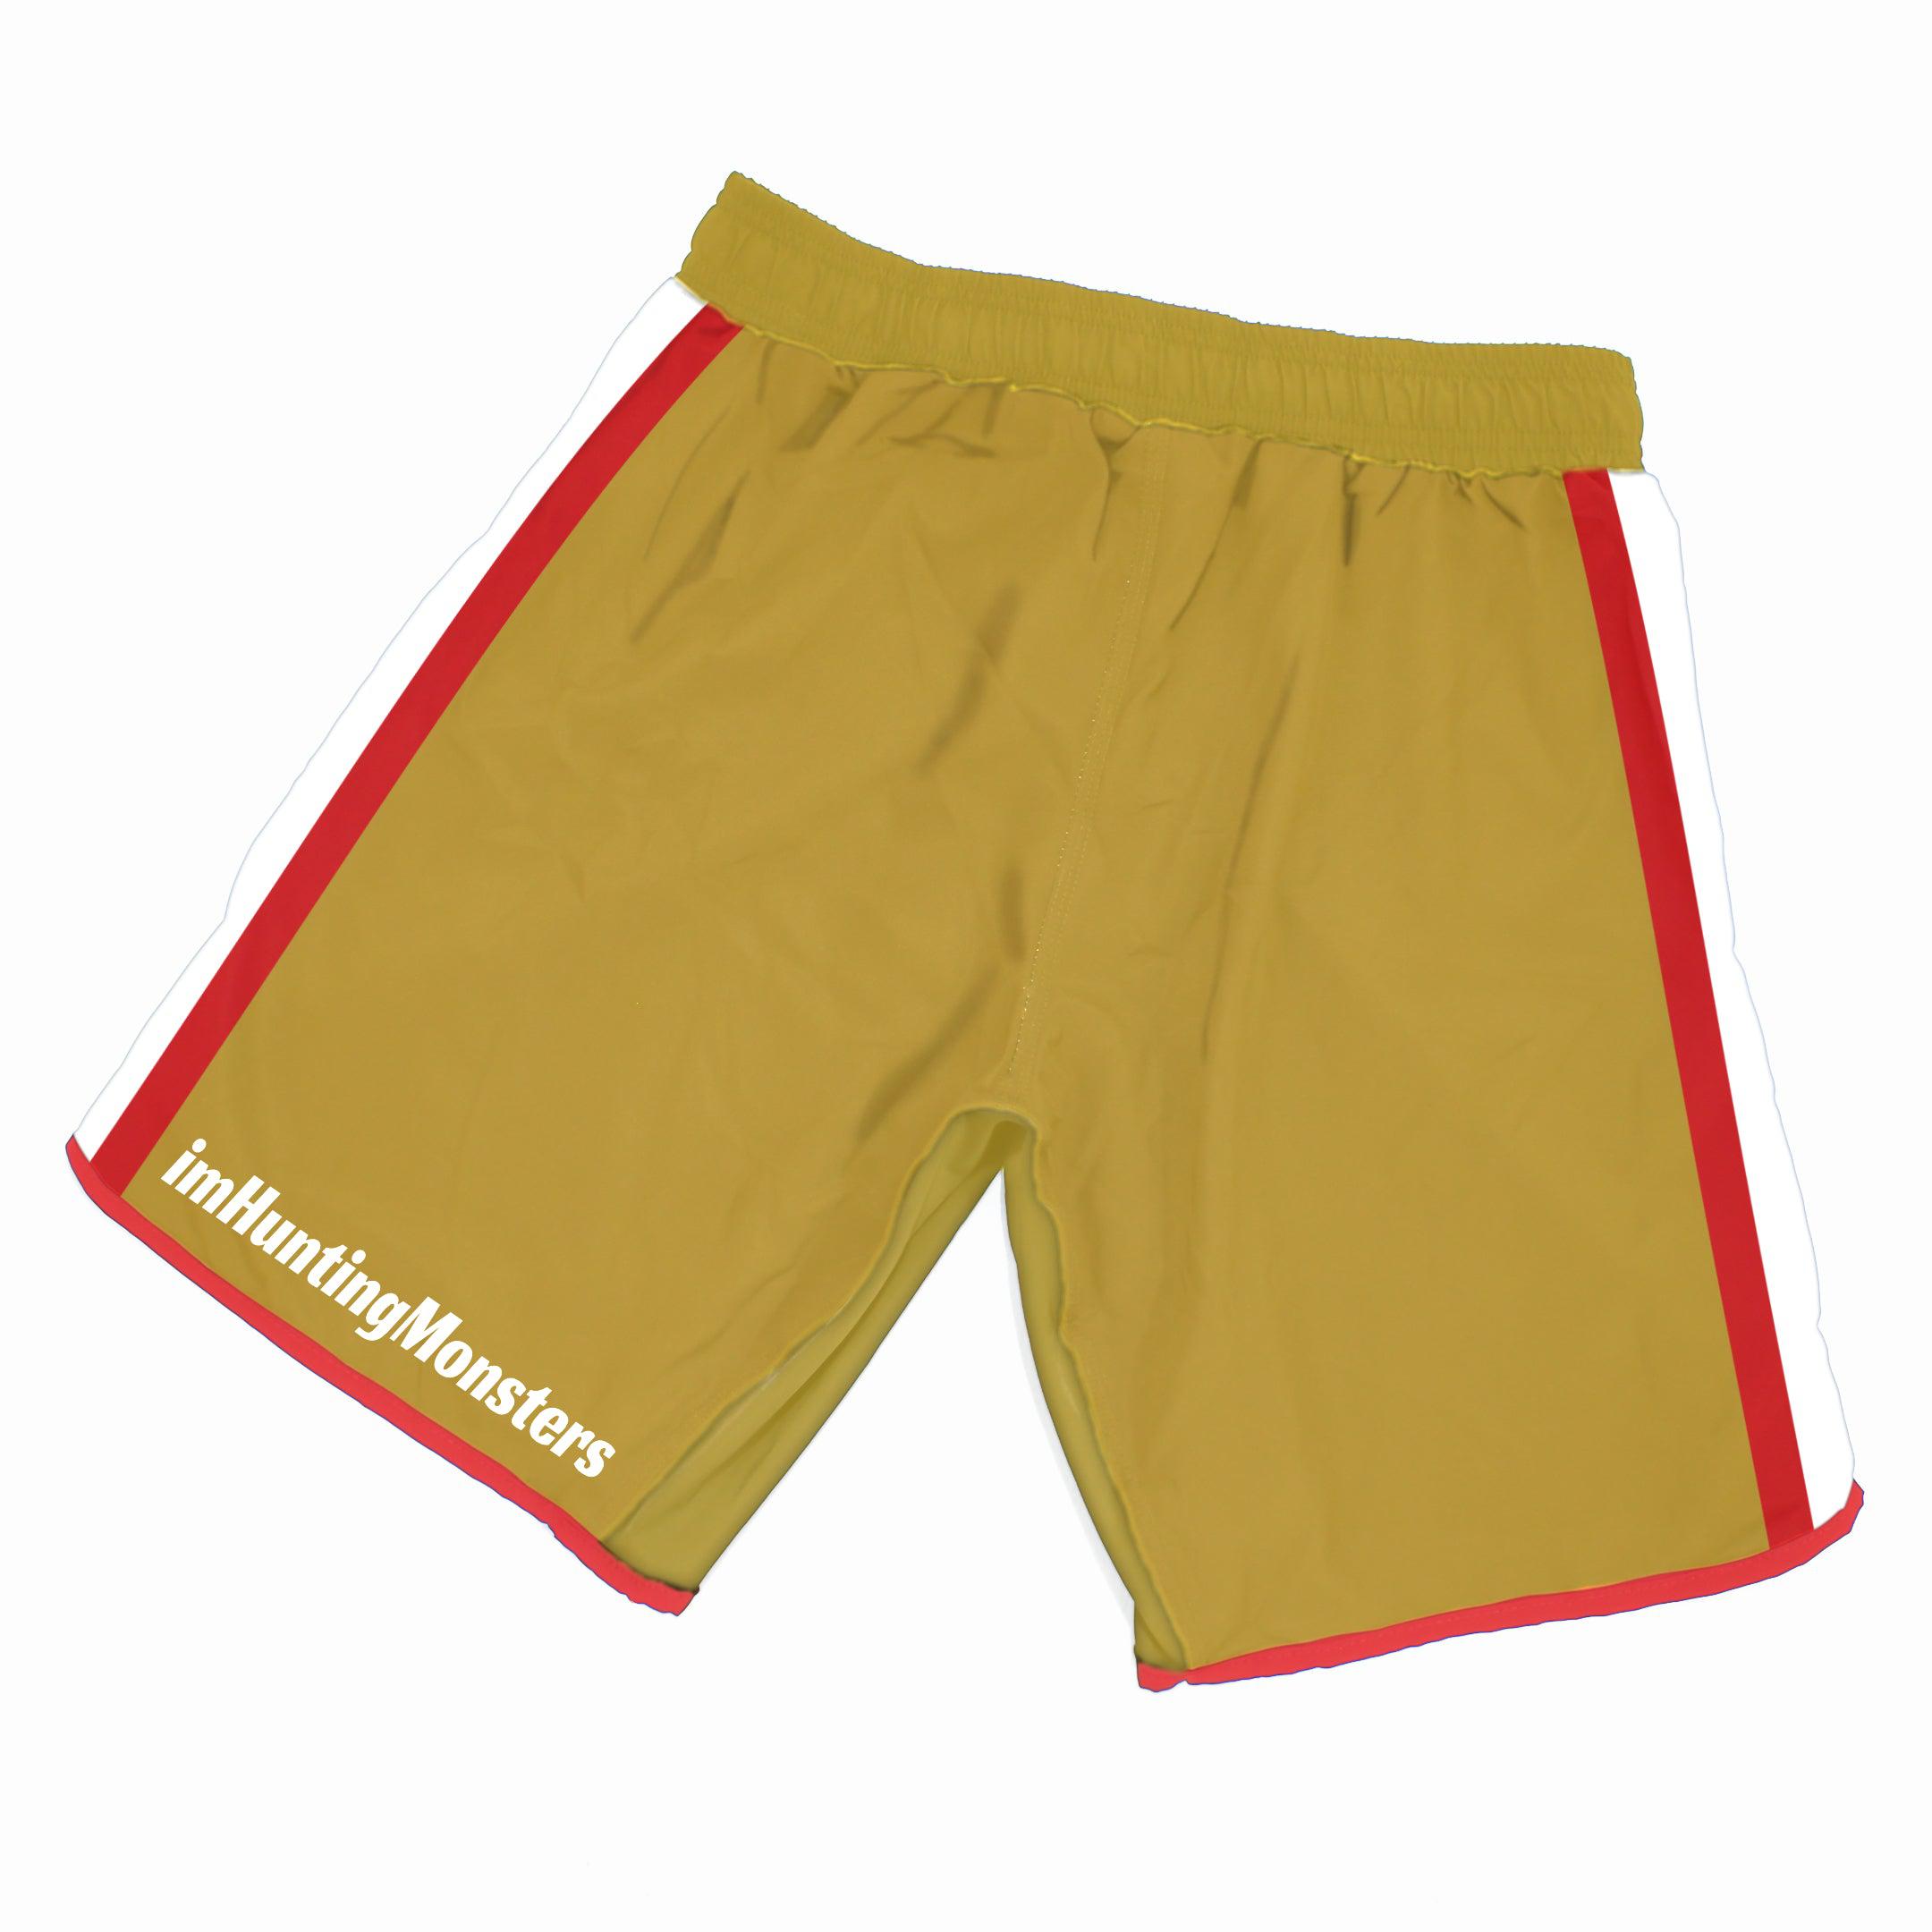 imHuntingMonsters "Gold Blooded" Grappling Shorts